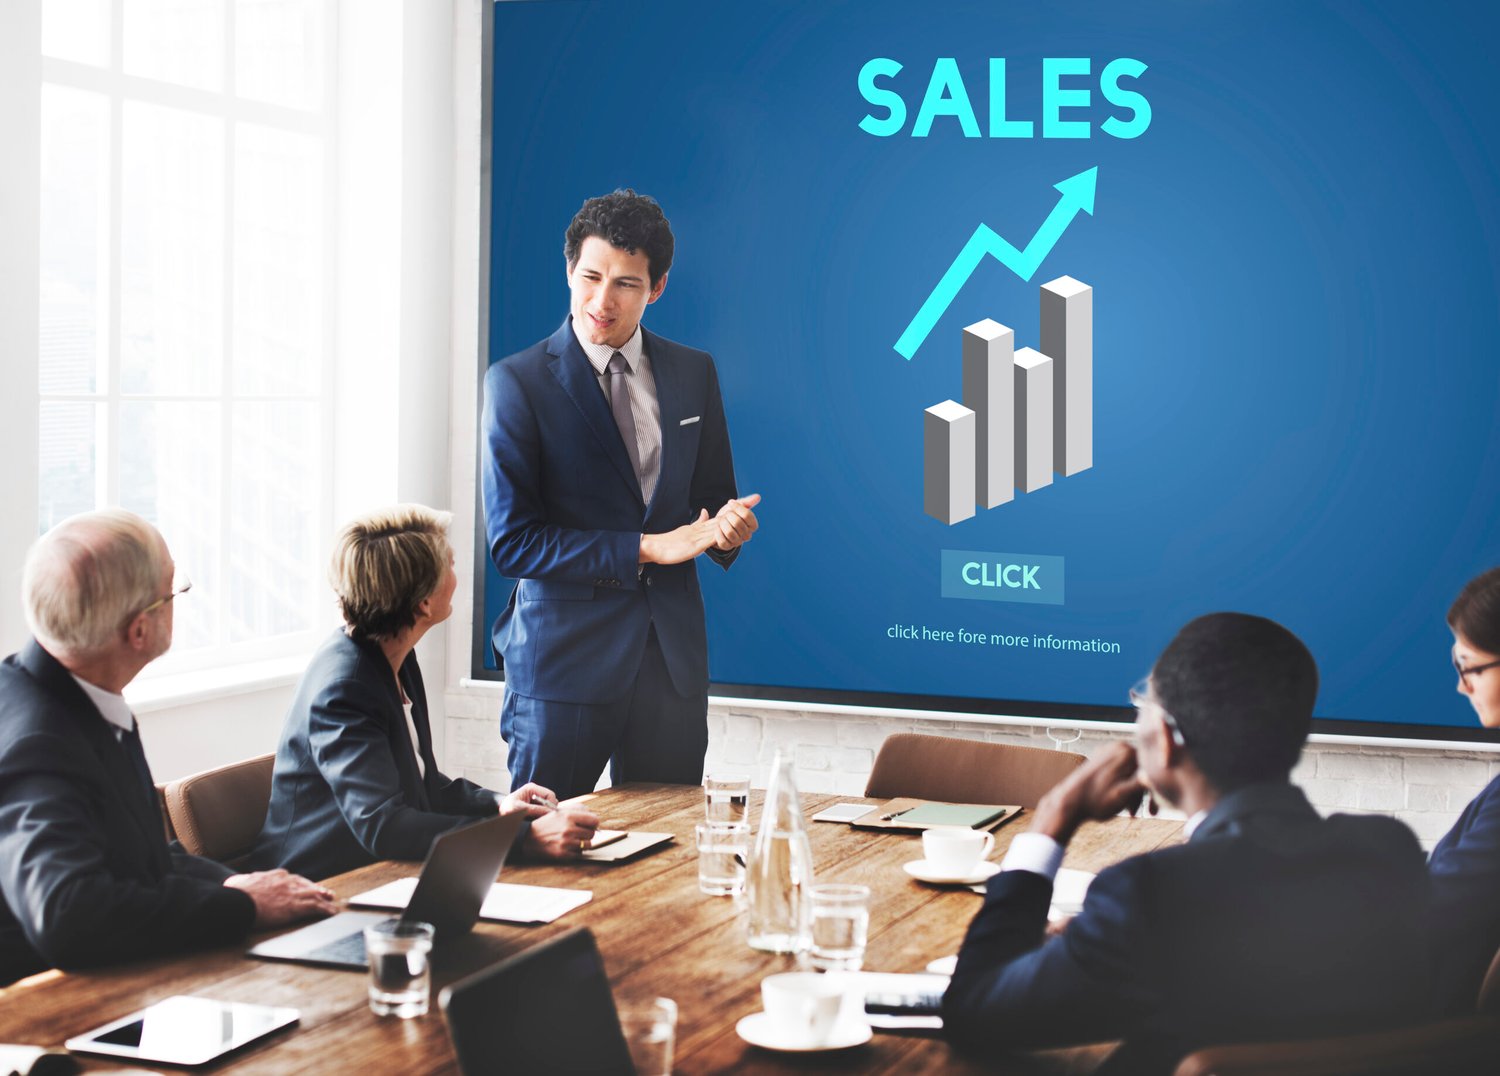 Sales Sell Selling Commerce Costs Profit Retail Concept